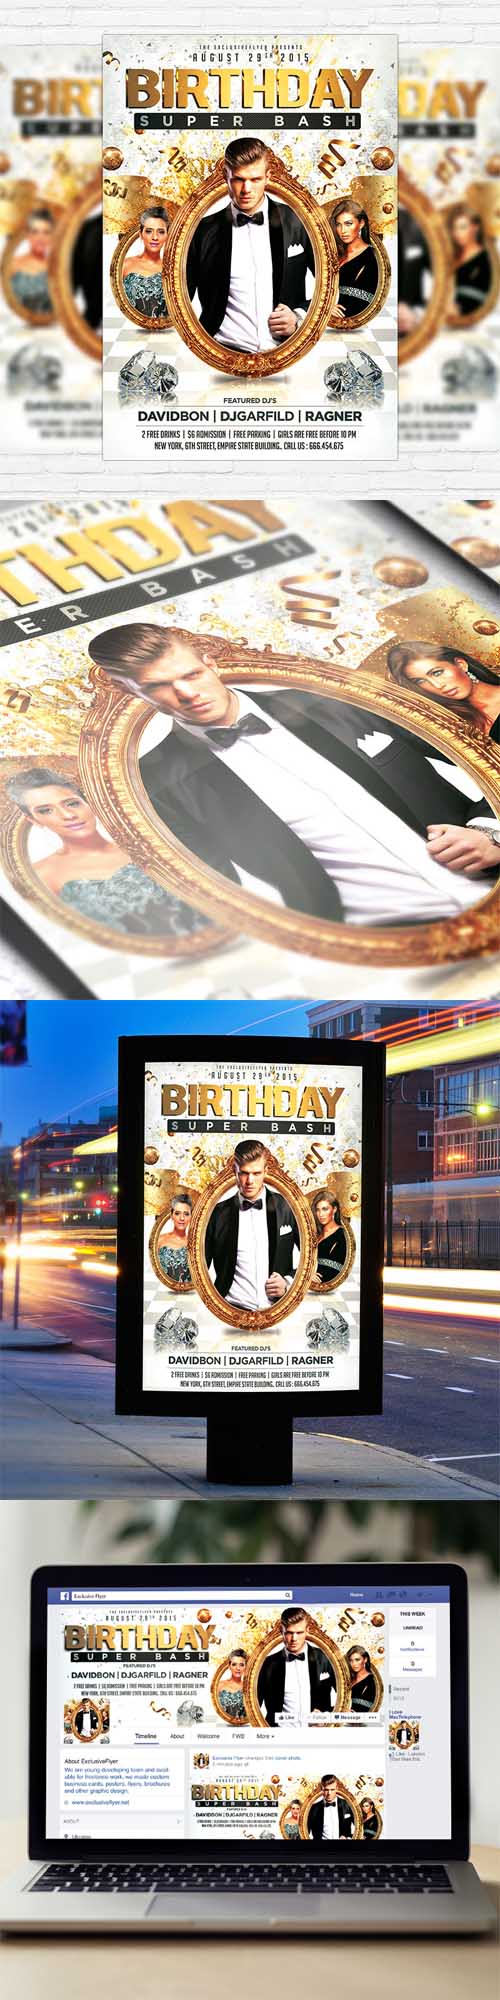 Flyer Template - Birthday Super Bash + Facebook Cover